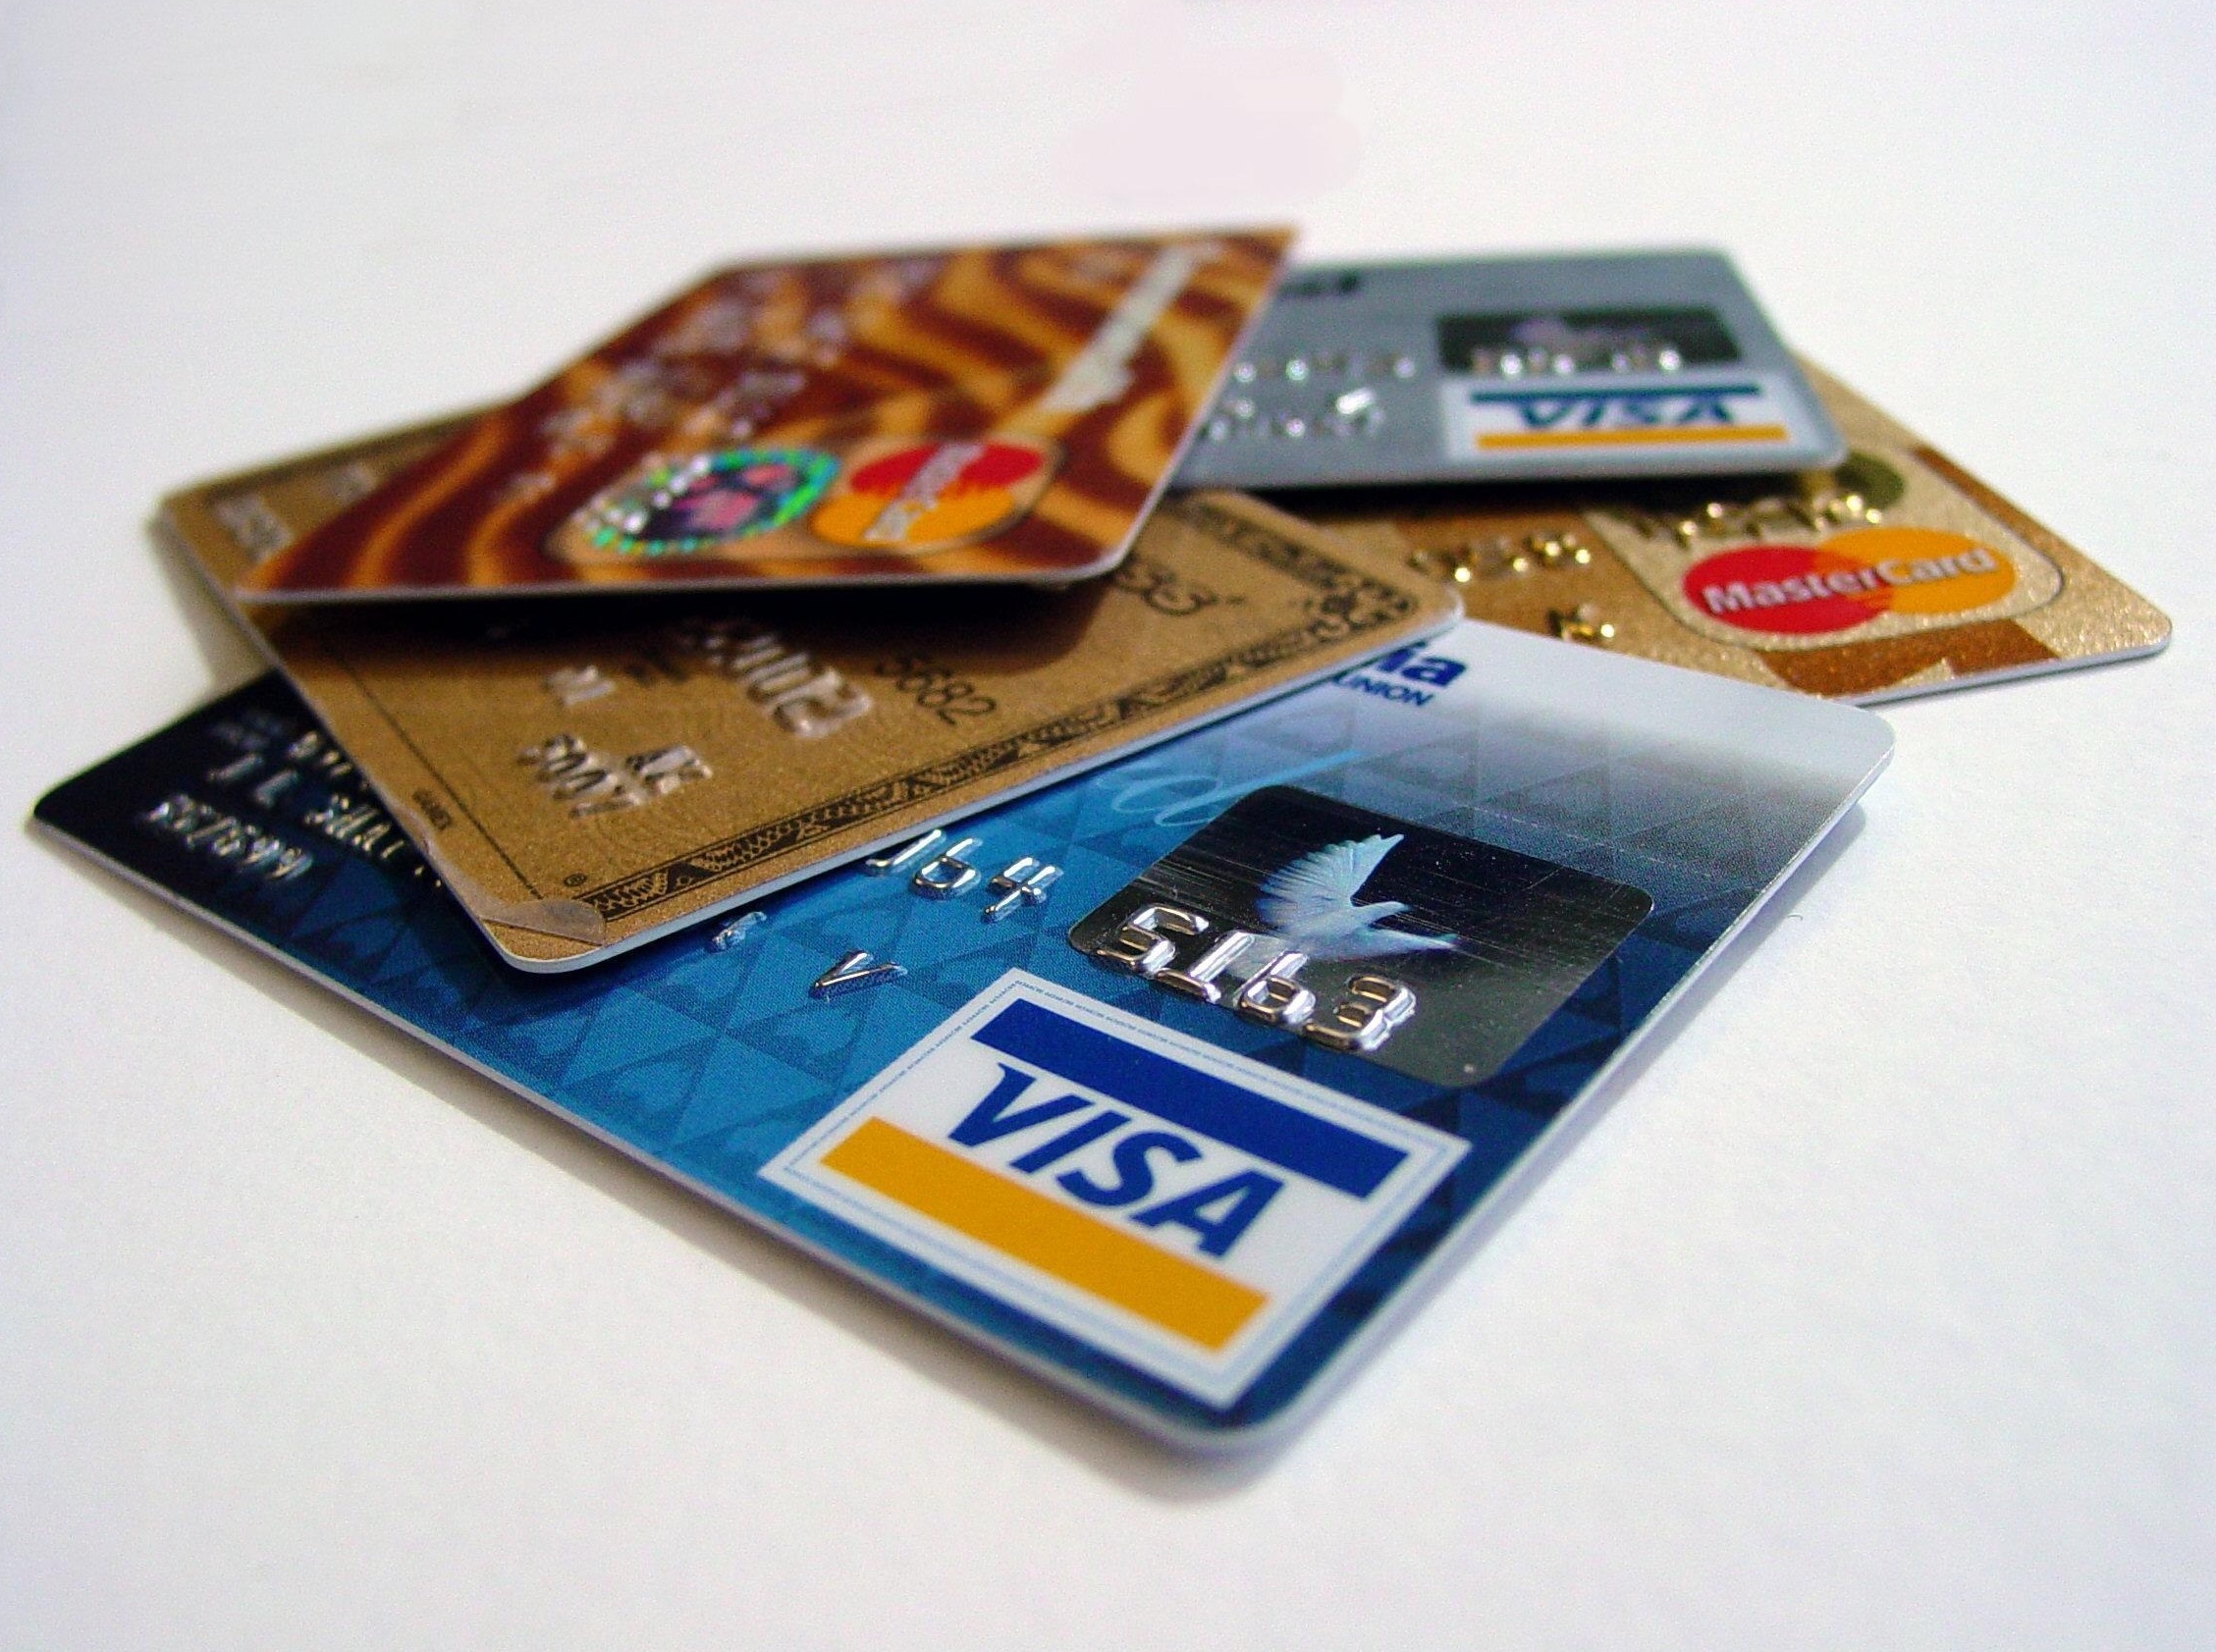 Credit card debt is rising at its fastest clip in more than 20 years as Americans owe a record $986 billion on their credit cards, a 14.7% increase from a year ago. (Jessica Shapiro–Fairfax Media via Getty Images)